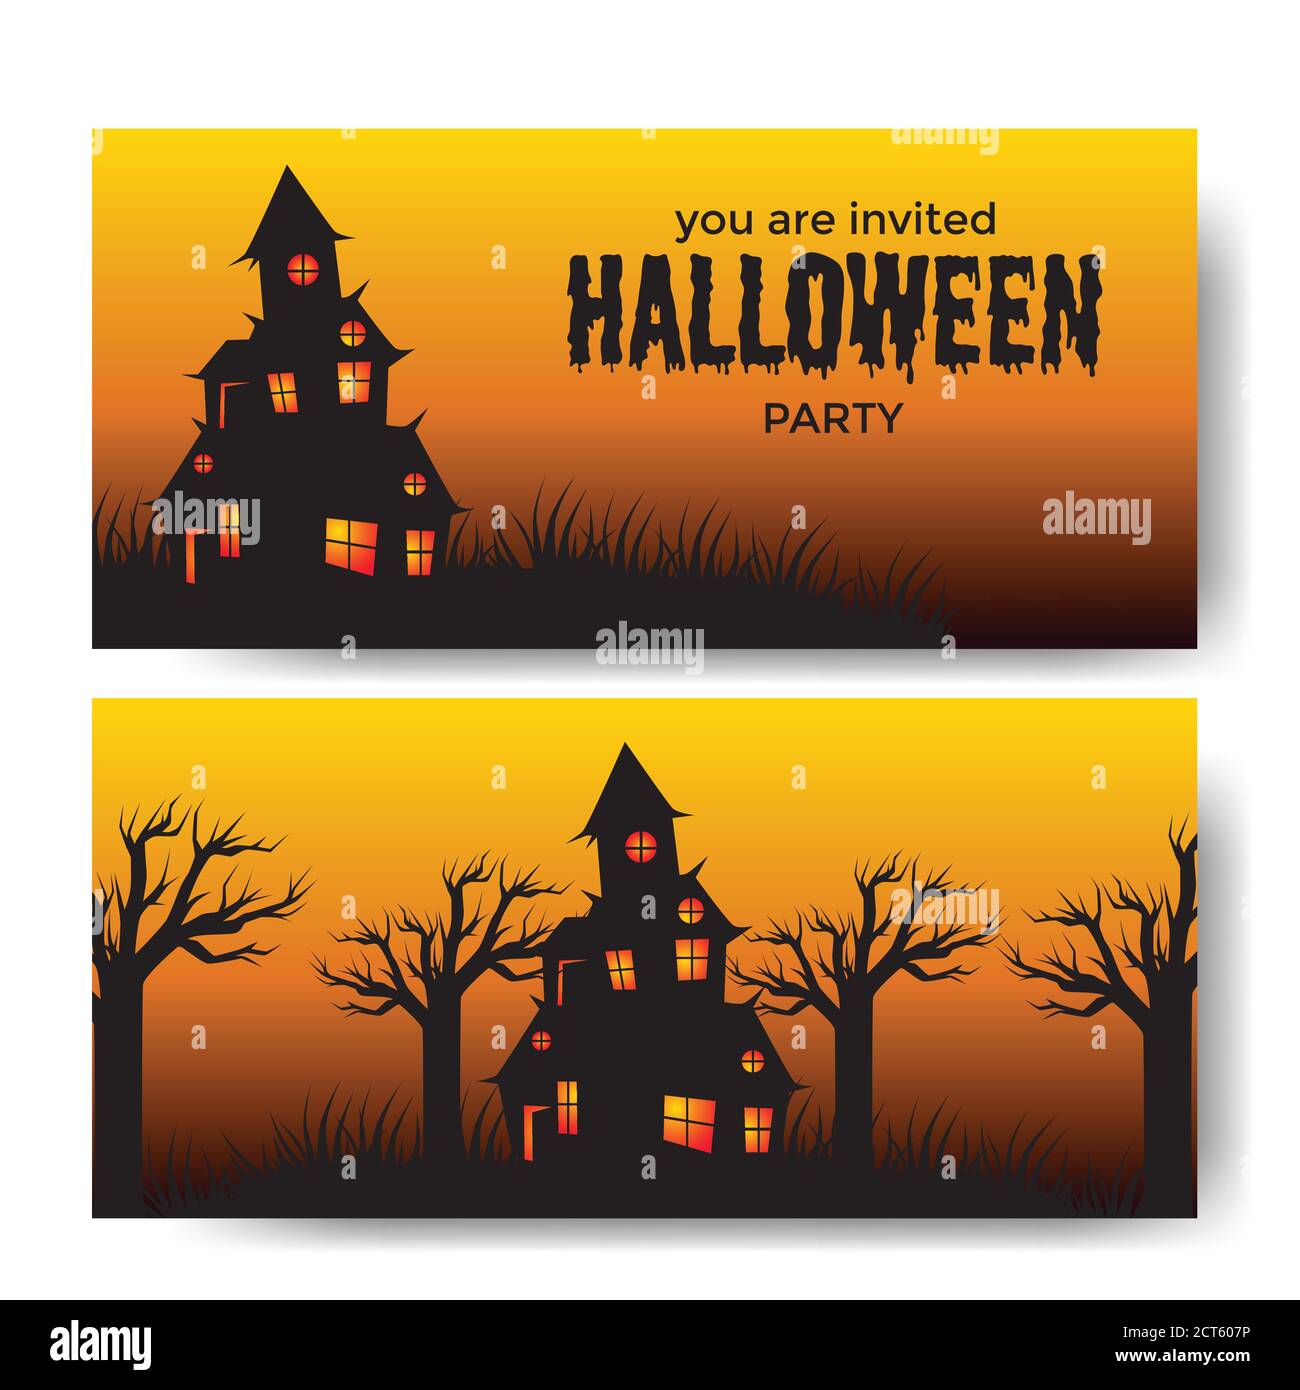 halloween party banner invitation card with illustration of scary house vampire Stock Vector